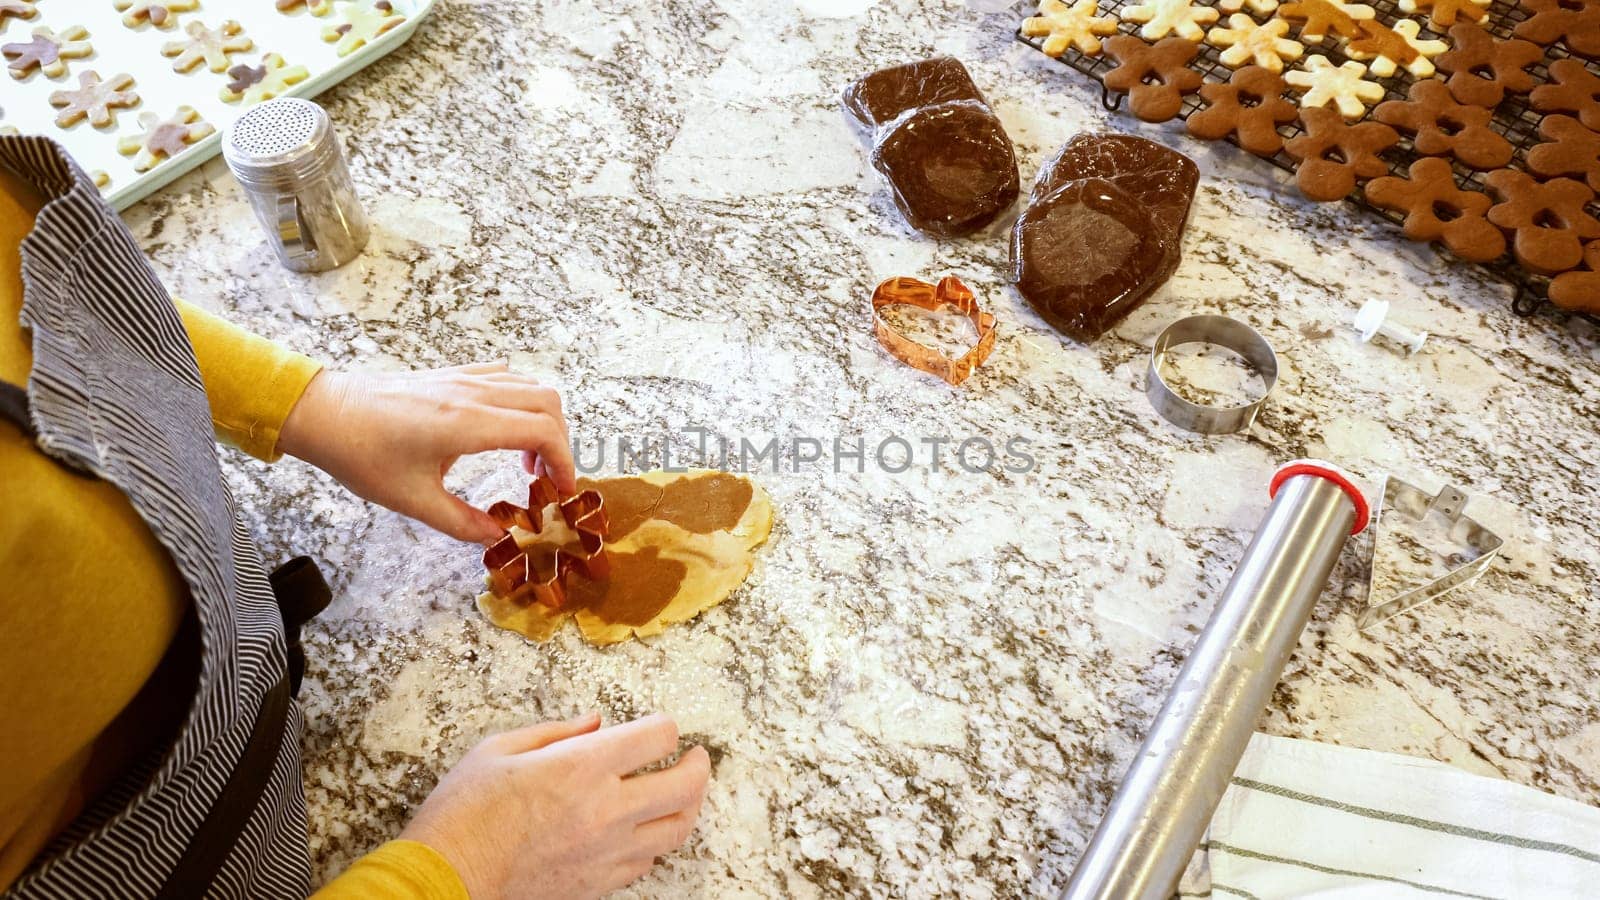 Using various festive cookie cutters, we're cutting out charming gingerbread cookies from the rolled dough on the sleek marble counter, bringing holiday cheer to the modern kitchen.